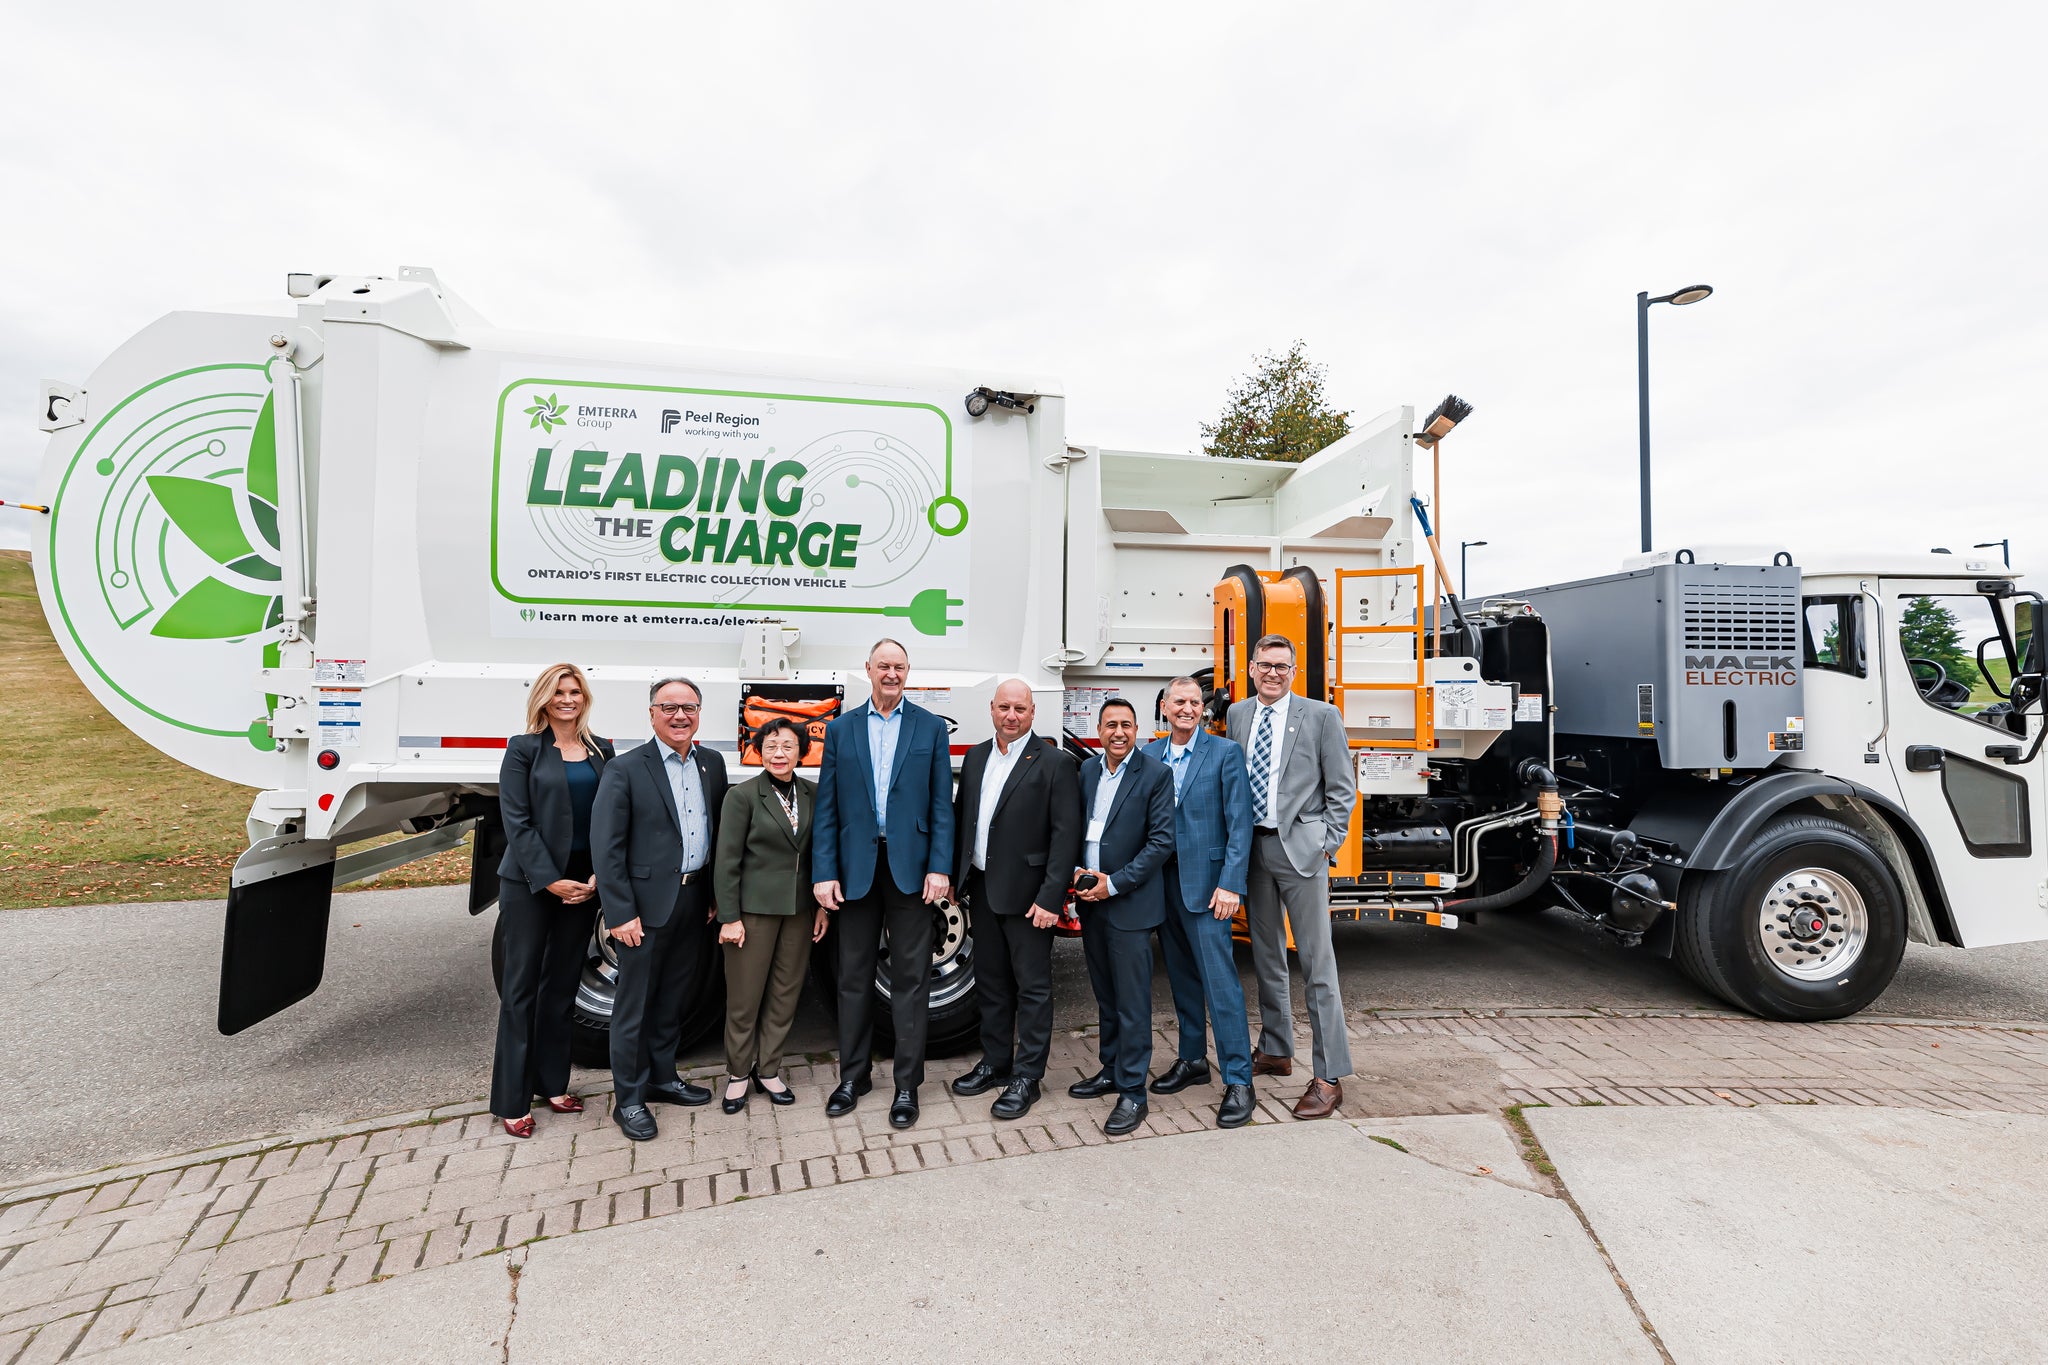 Emterra Group and Peel Region Launch Ontario's First Fully Electric Waste Collection Vehicle